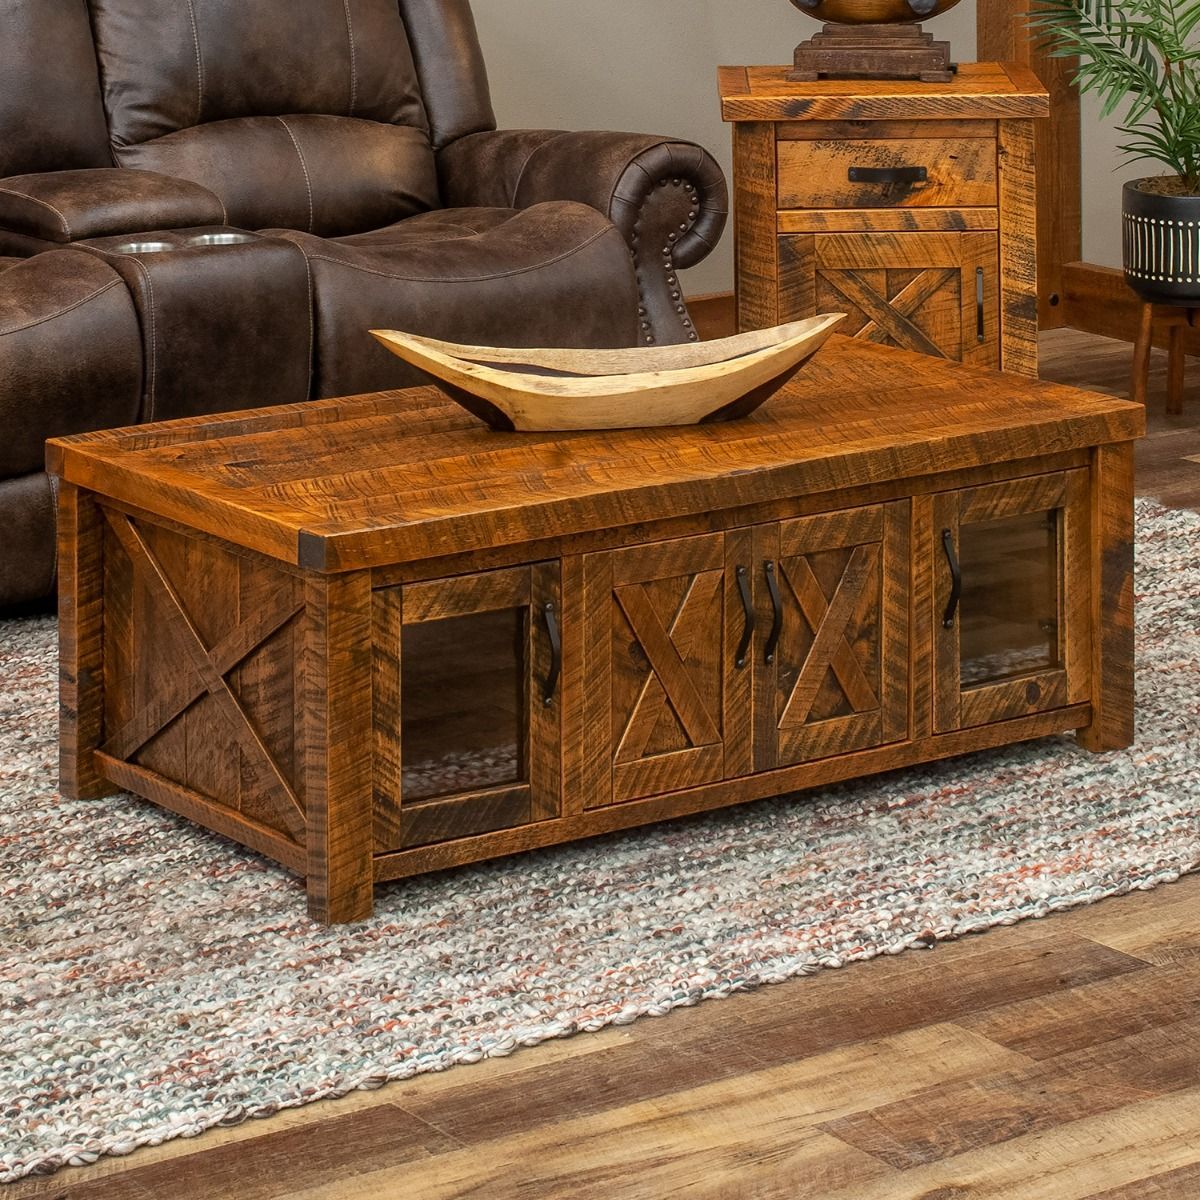 Western Winds Enclosed Coffee Table With 4 Doors In Coffee Tables With Storage And Barn Doors (View 3 of 15)